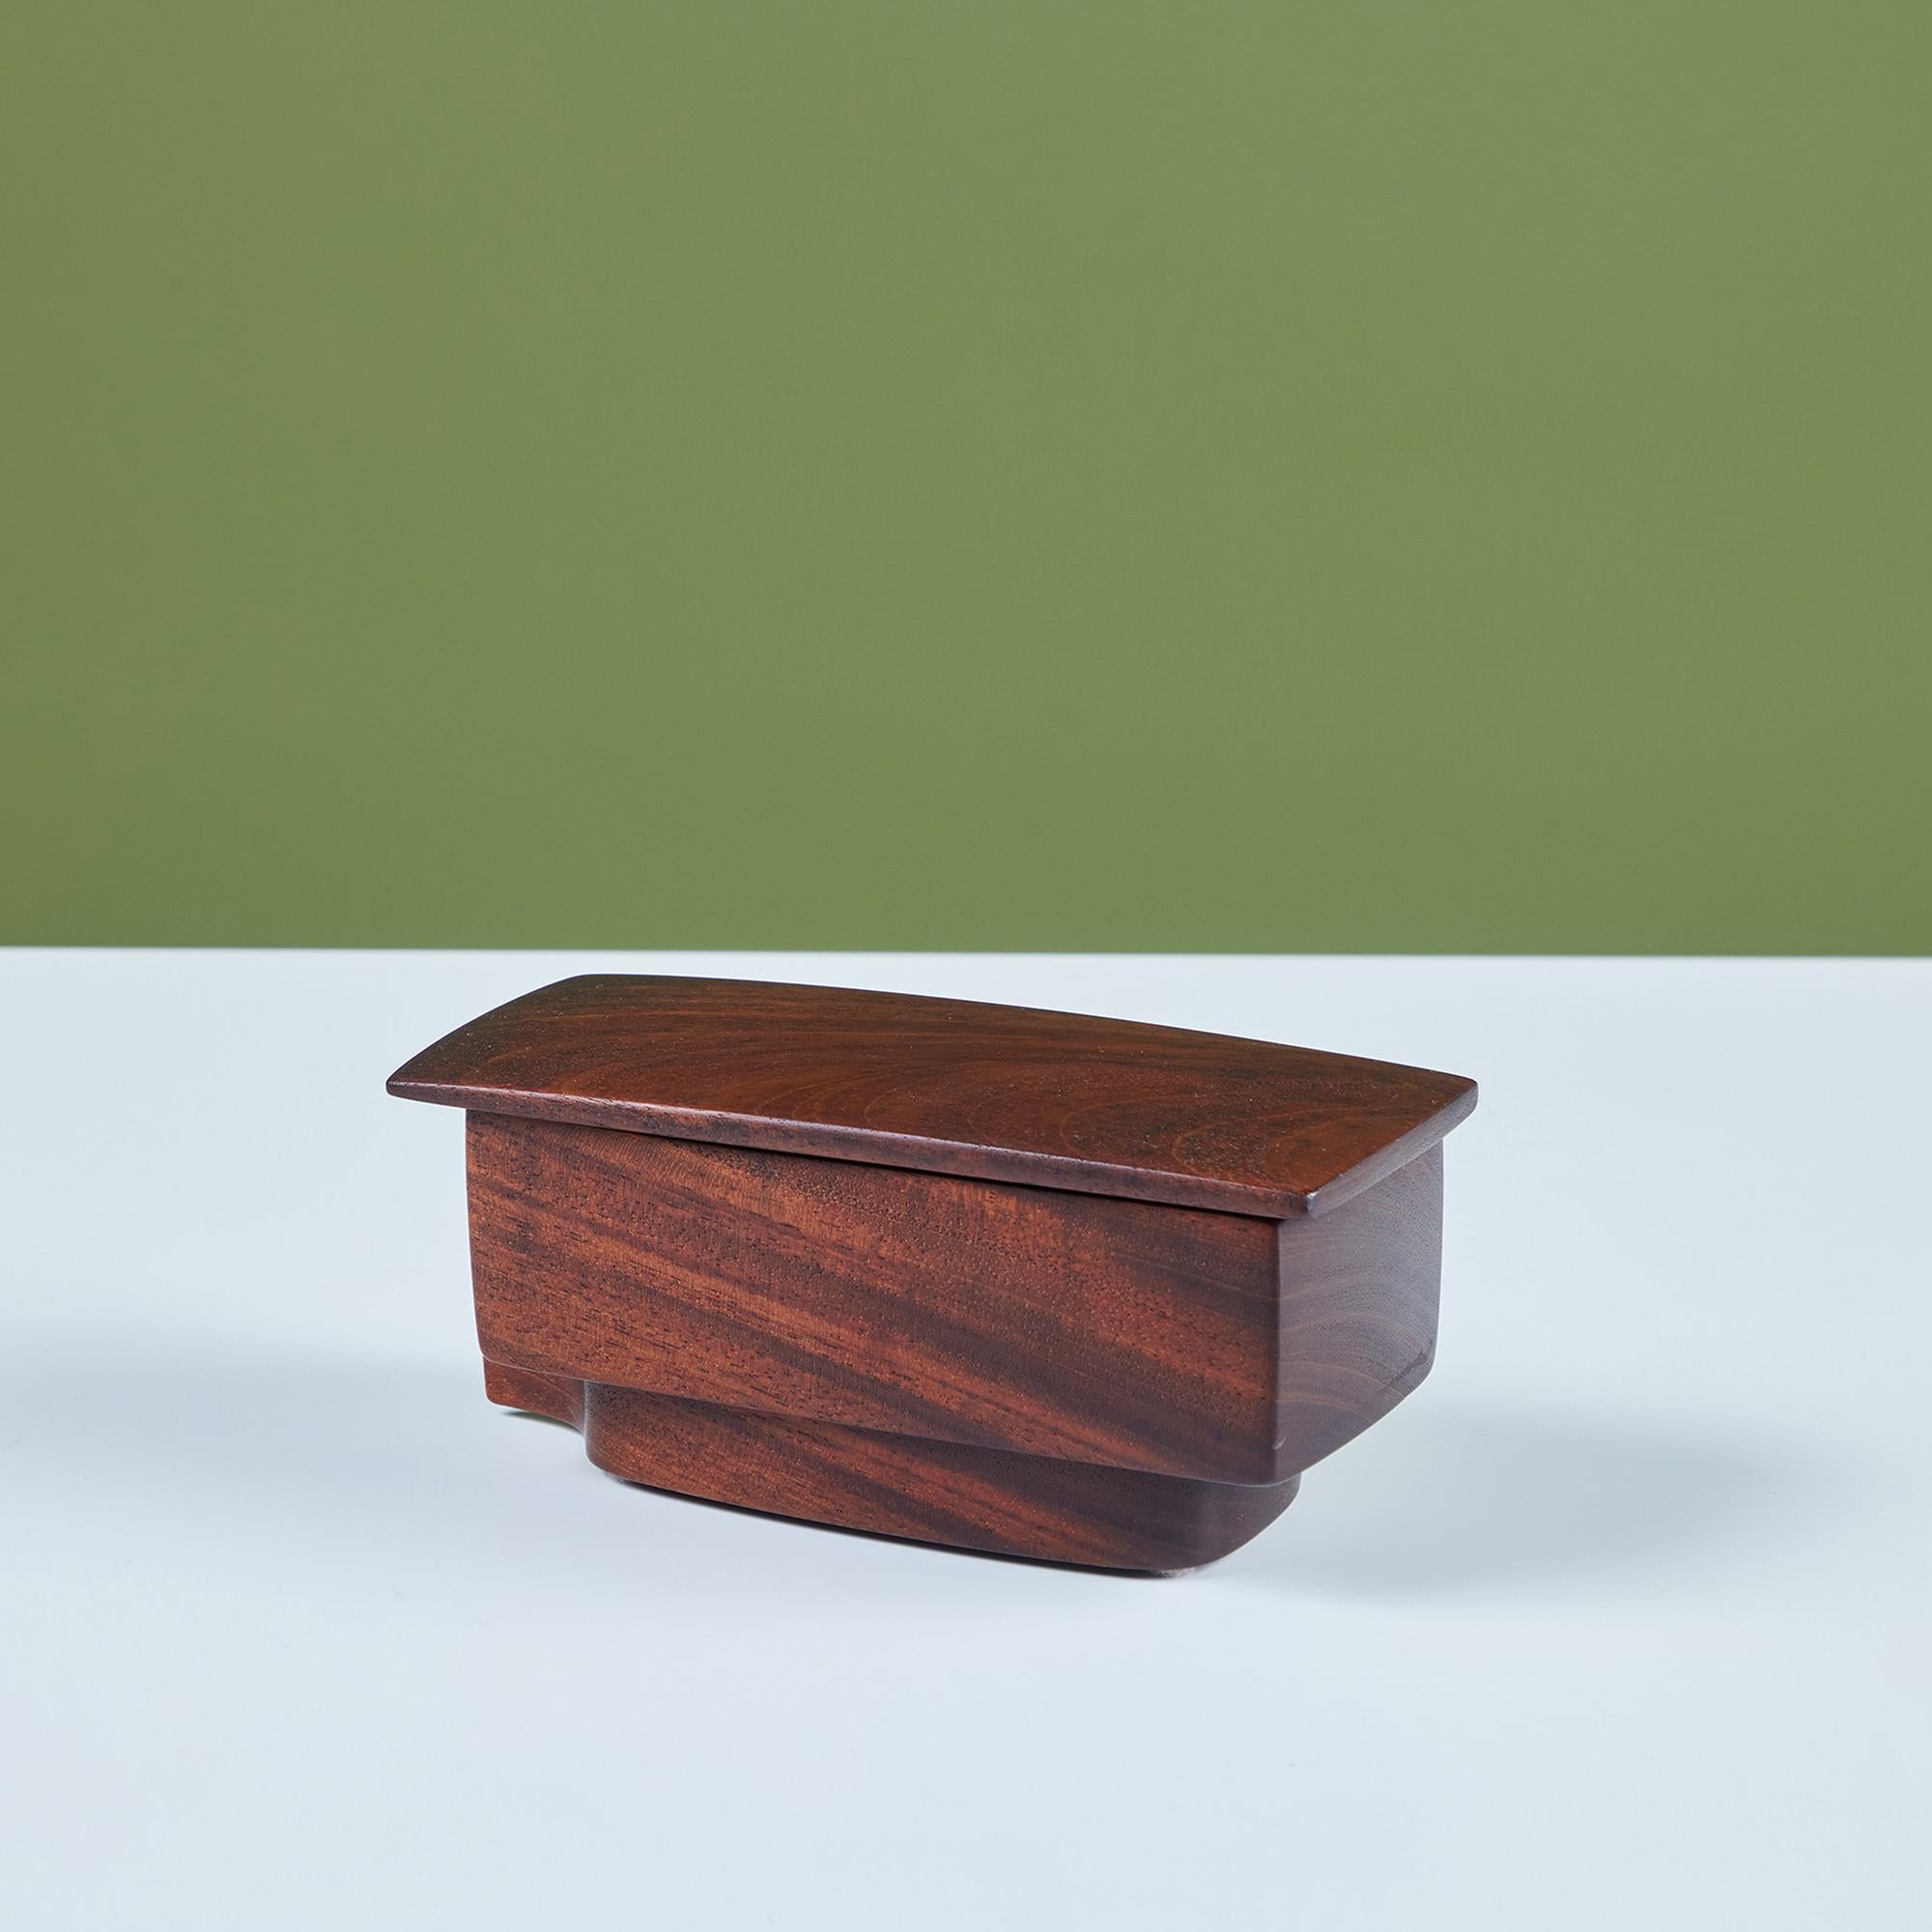 Hand carved rectangular lidded walnut box. The box showcases a beautifully hand scalloped wood interior with an inset base that offers a fun groove detail. Signed by the artist - 